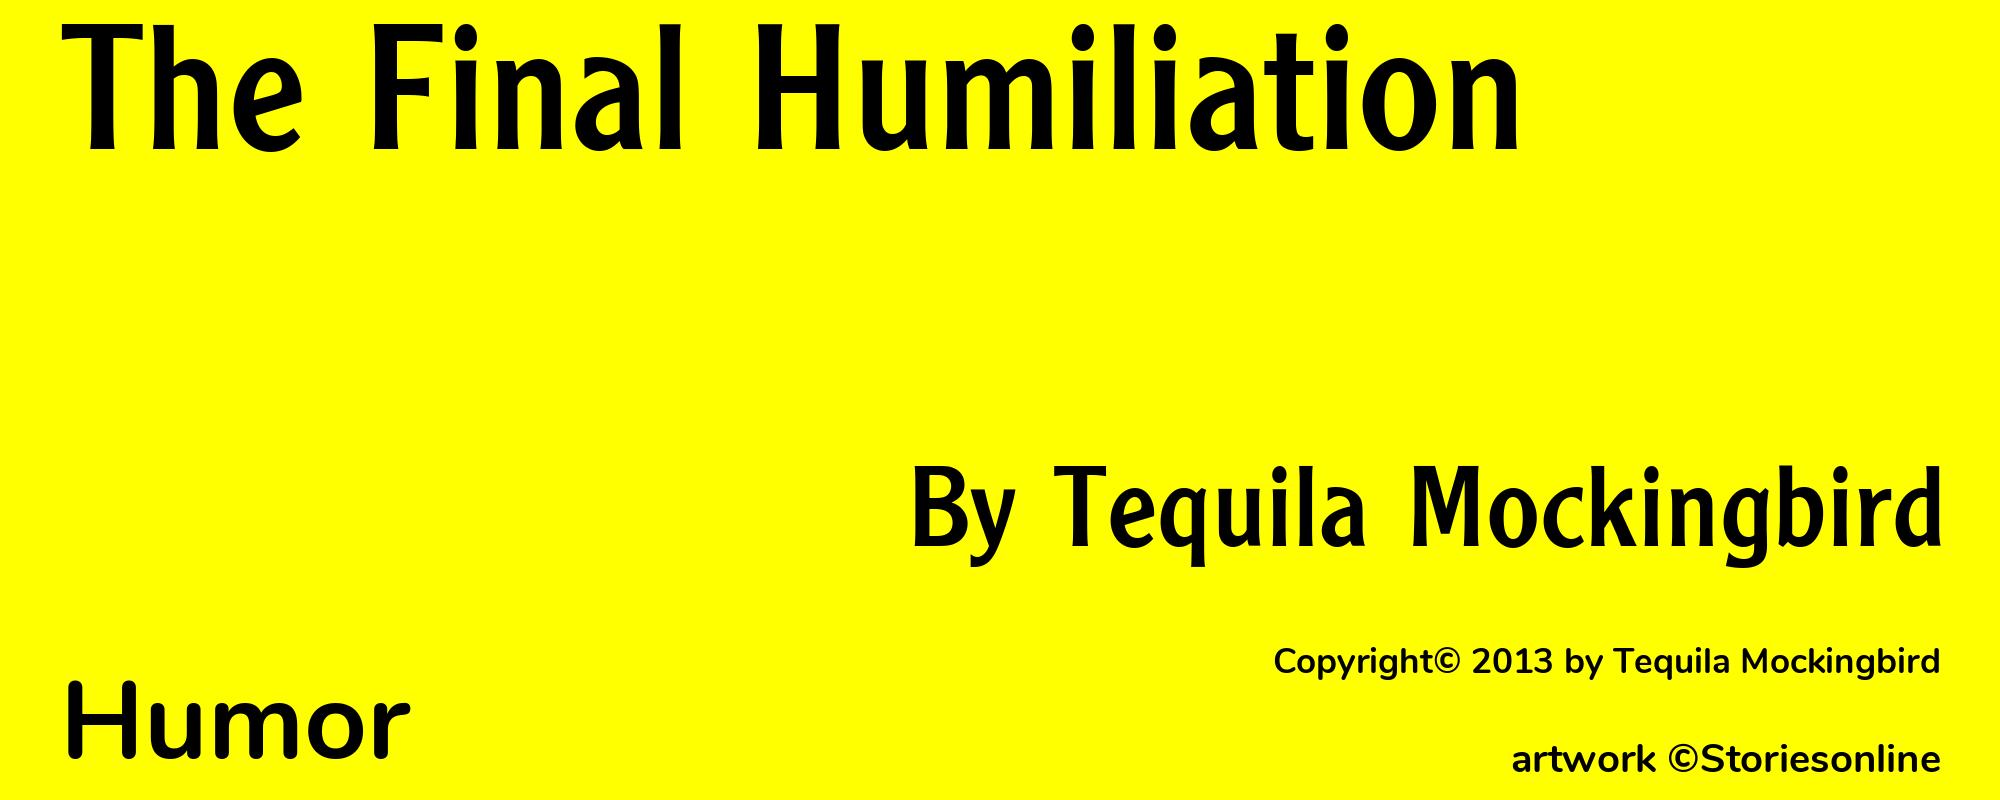 The Final Humiliation - Cover